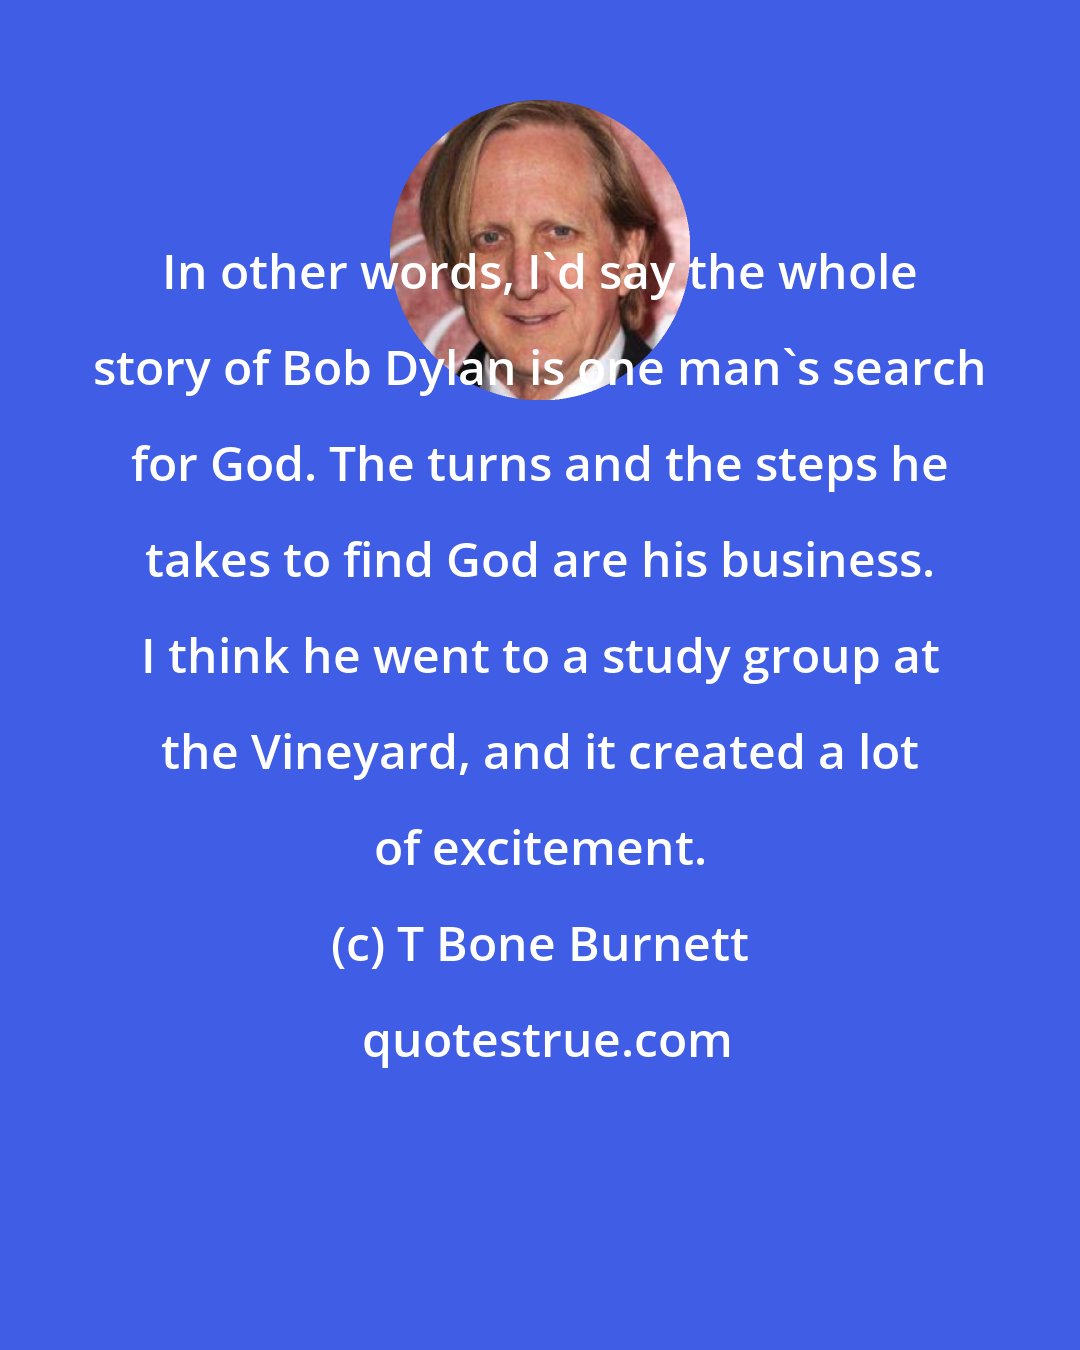 T Bone Burnett: In other words, I'd say the whole story of Bob Dylan is one man's search for God. The turns and the steps he takes to find God are his business. I think he went to a study group at the Vineyard, and it created a lot of excitement.